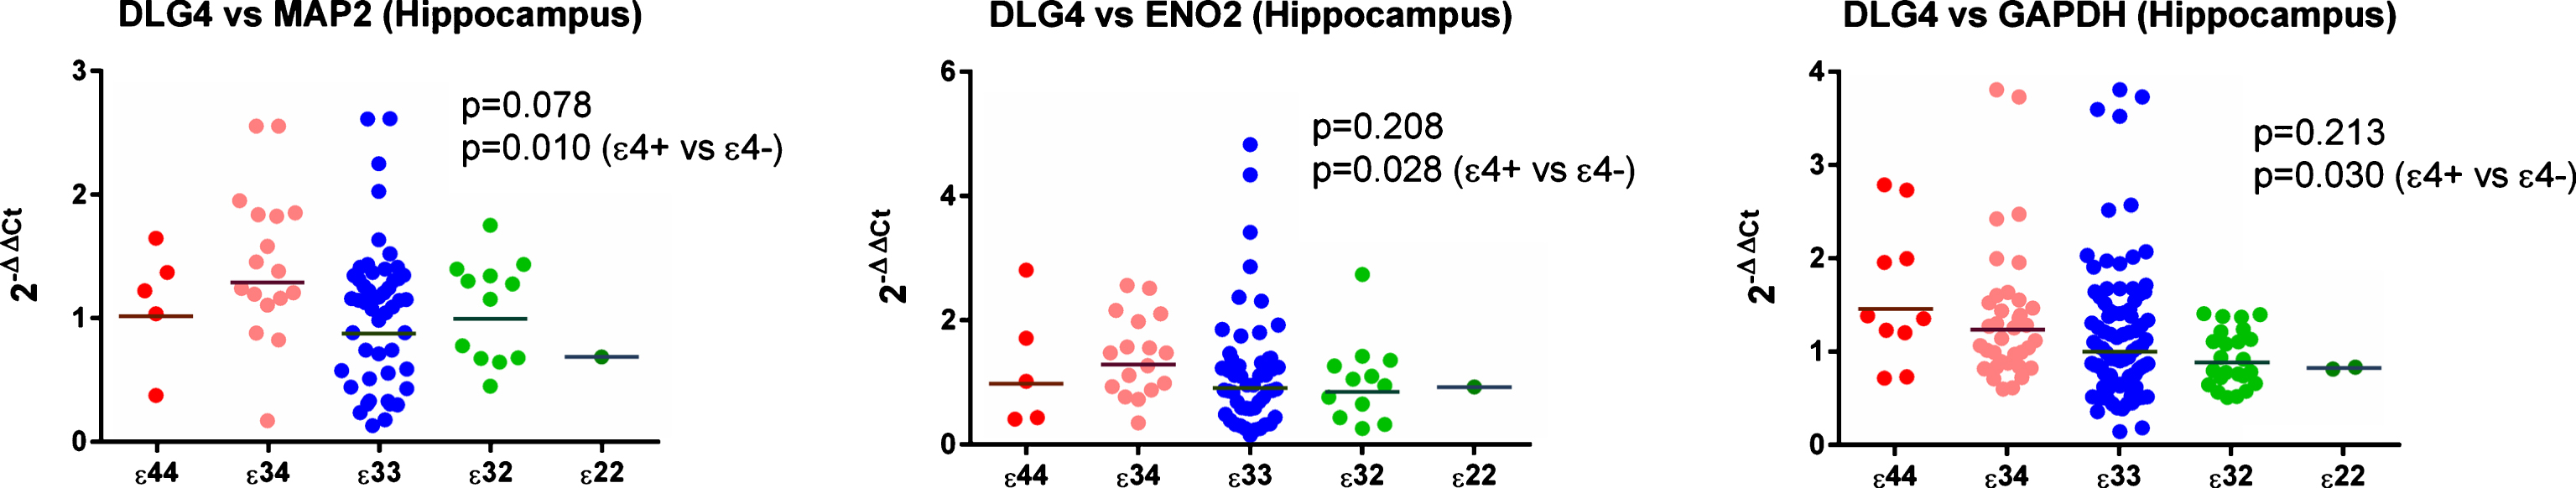 Gene expression of DLG4 (gene for PSD95) in the hippocampus. As shown there was evidence of a between-group difference with respect to all three reference genes.